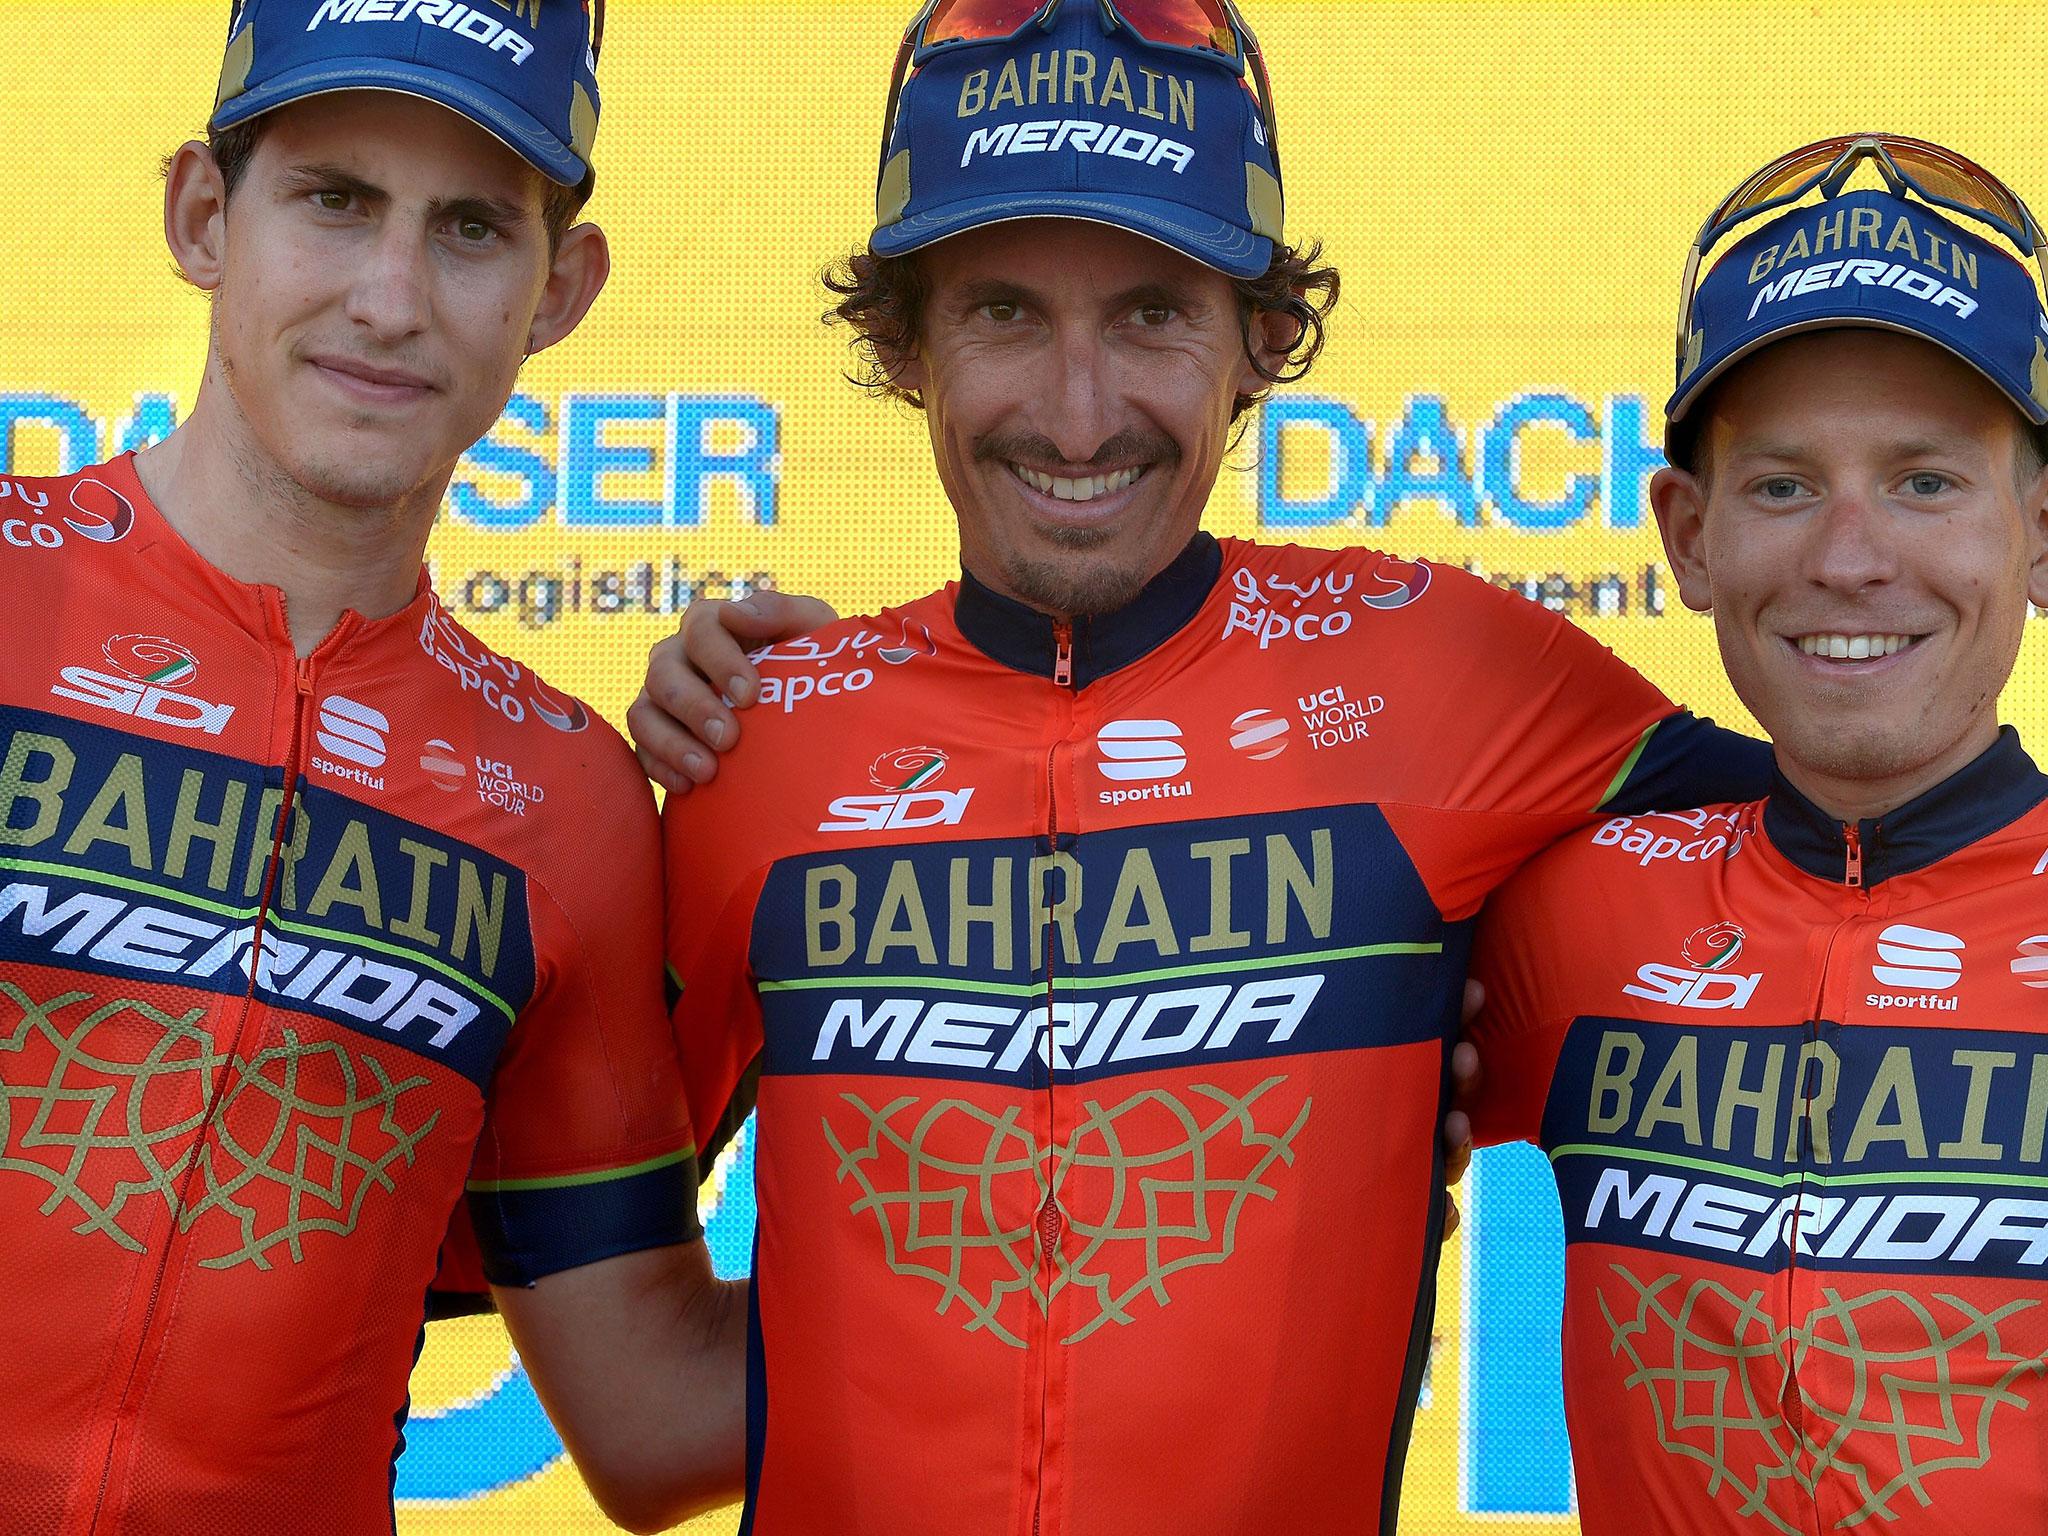 McLaren have entered a partnership with cycling team Bahrain Merida